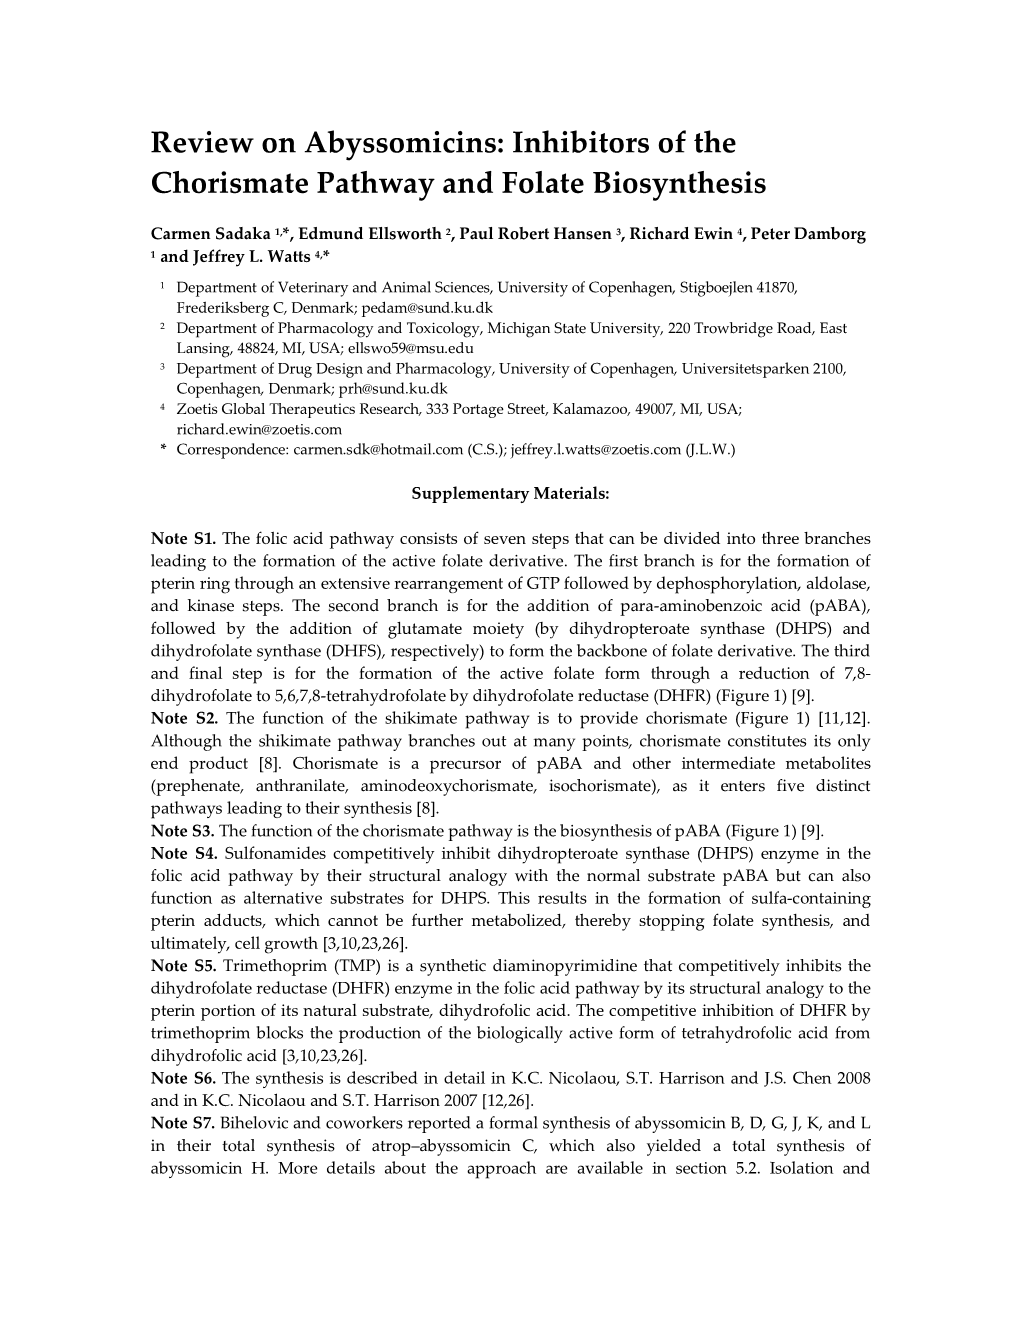 Review on Abyssomicins: Inhibitors of the Chorismate Pathway and Folate Biosynthesis